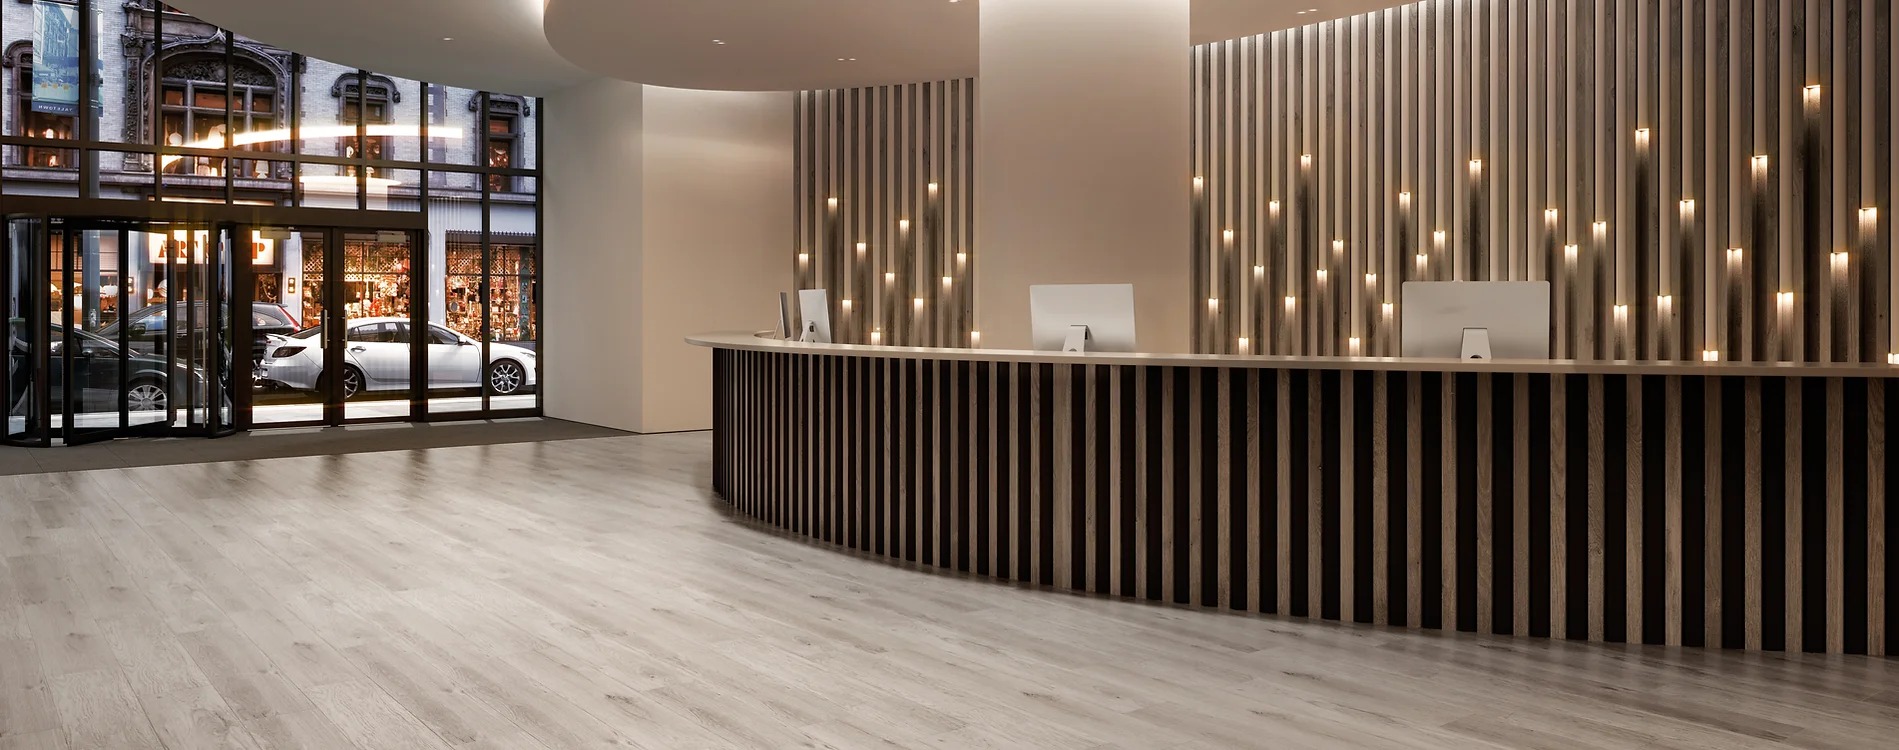 A reception desk with lights on the wall.